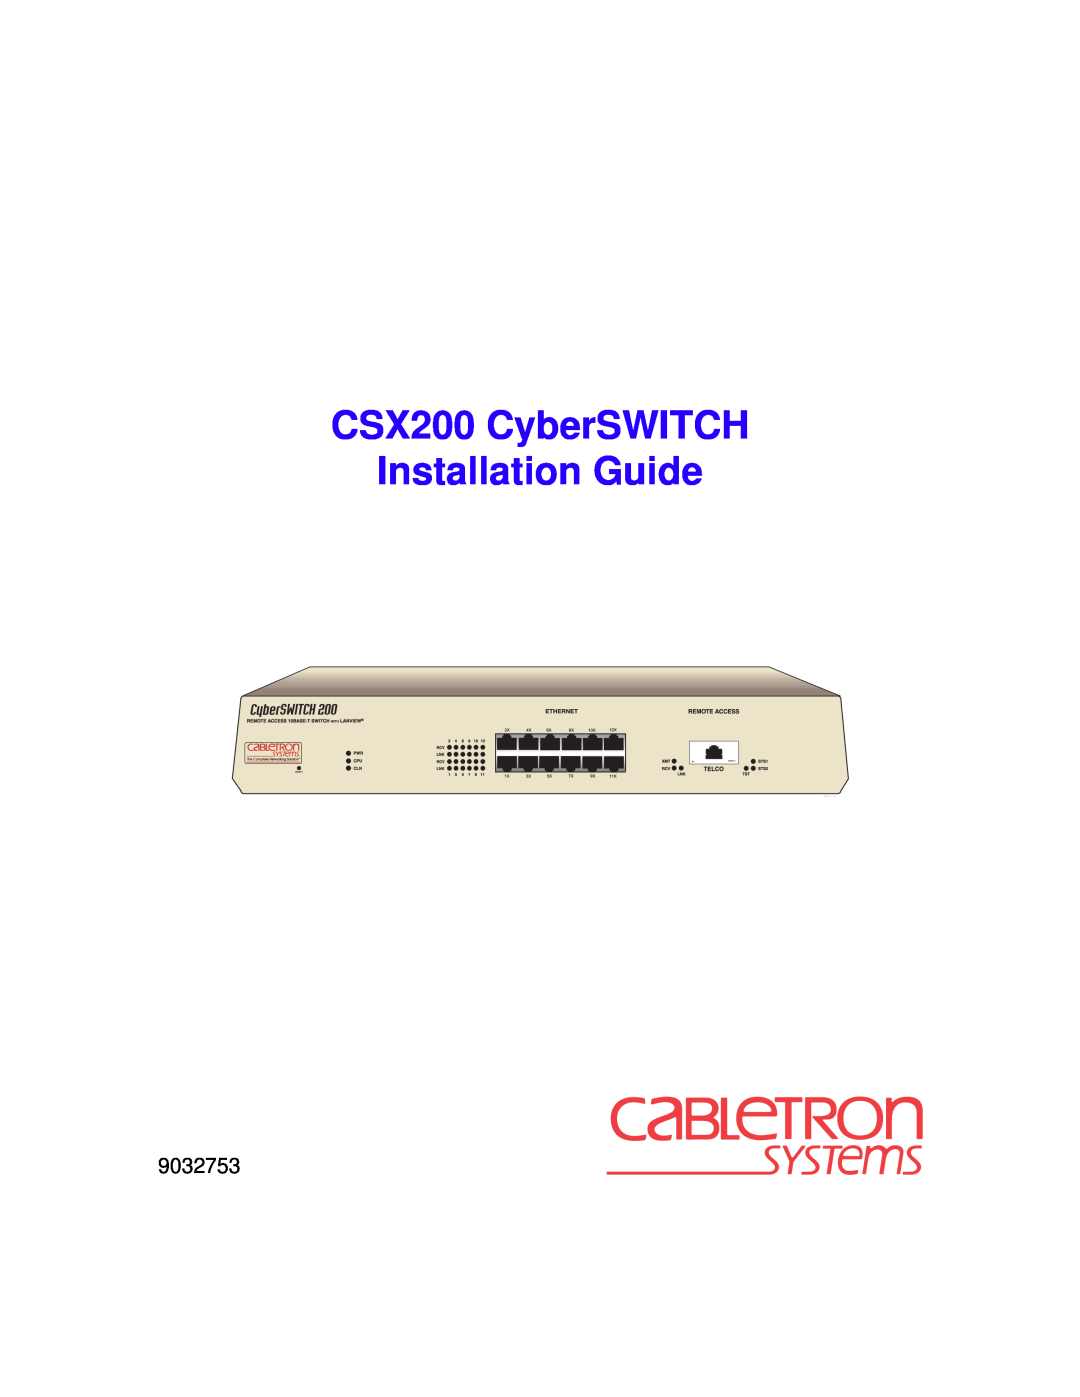 Cabletron Systems manual CSX200 and CSX400 User’s Guide 